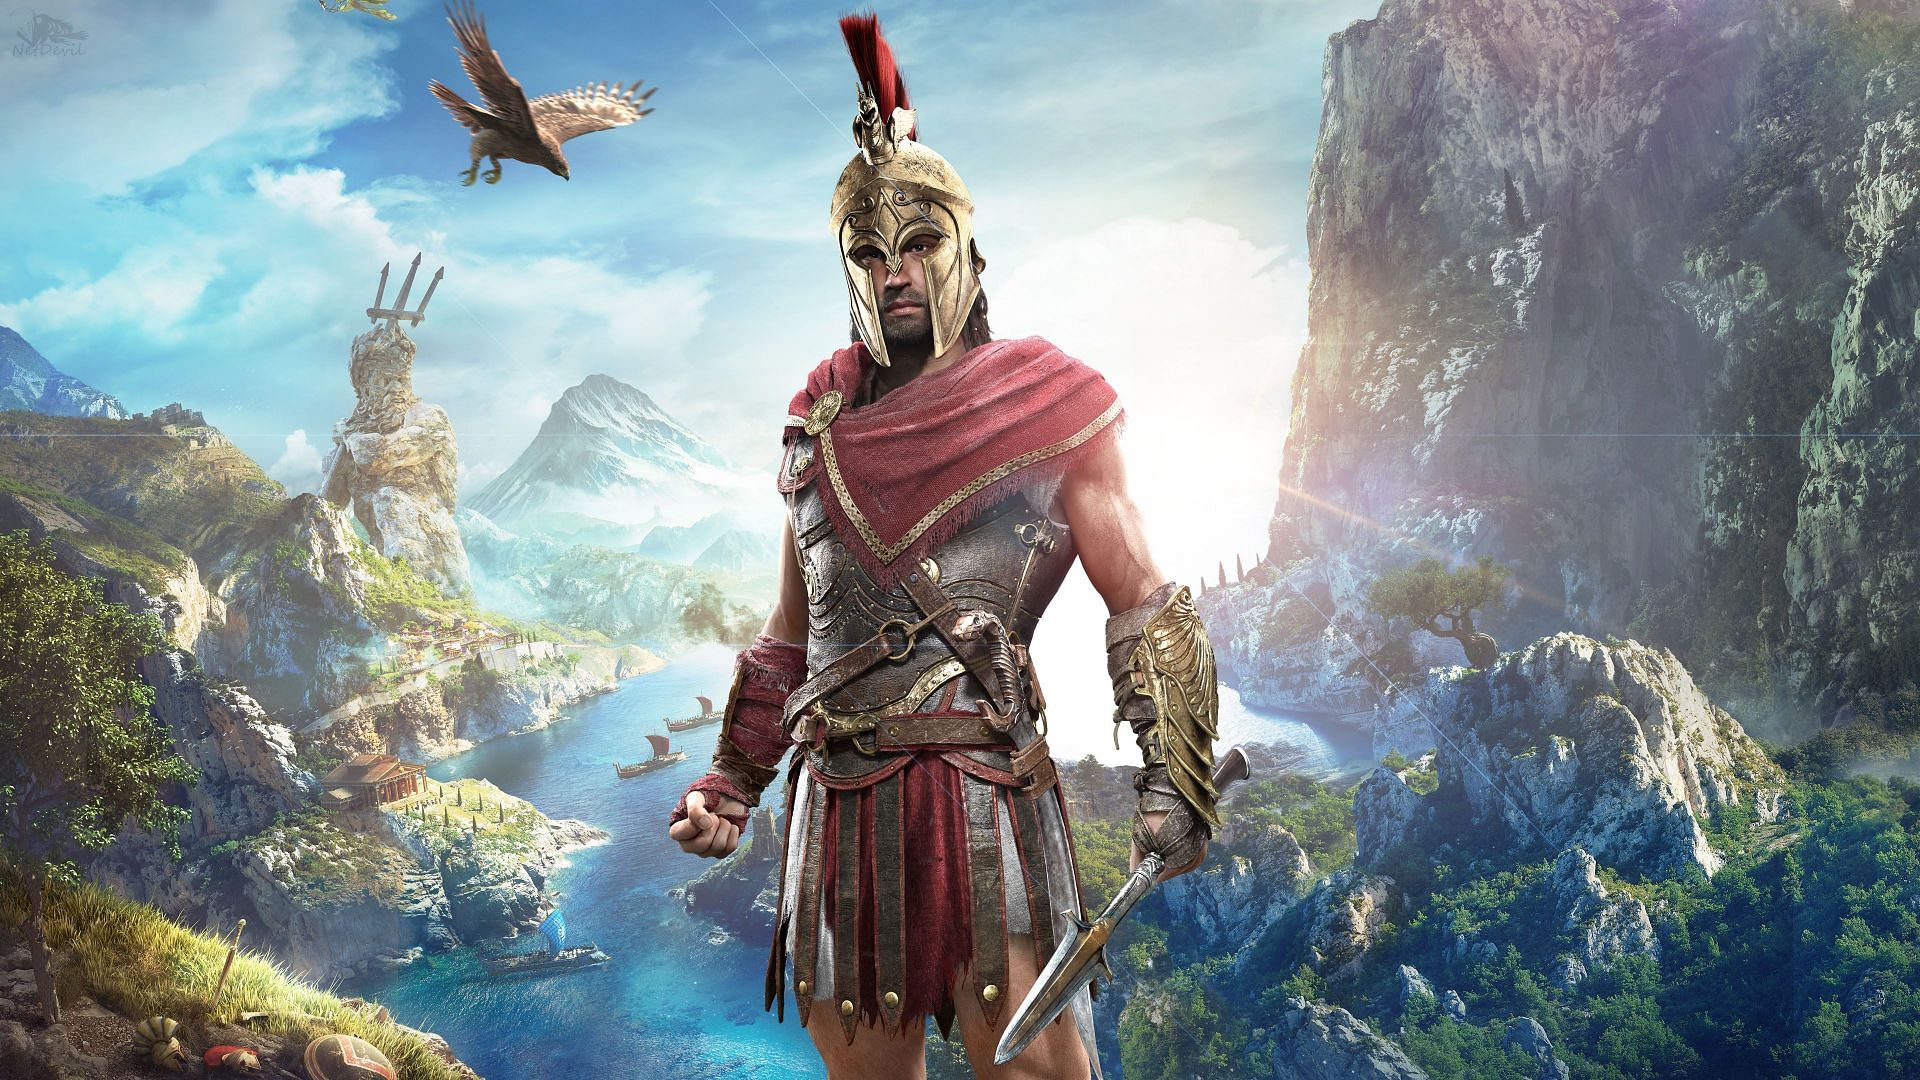 Alexios was one of the characters you can play as in Odyssey. (Image via Ubisoft)